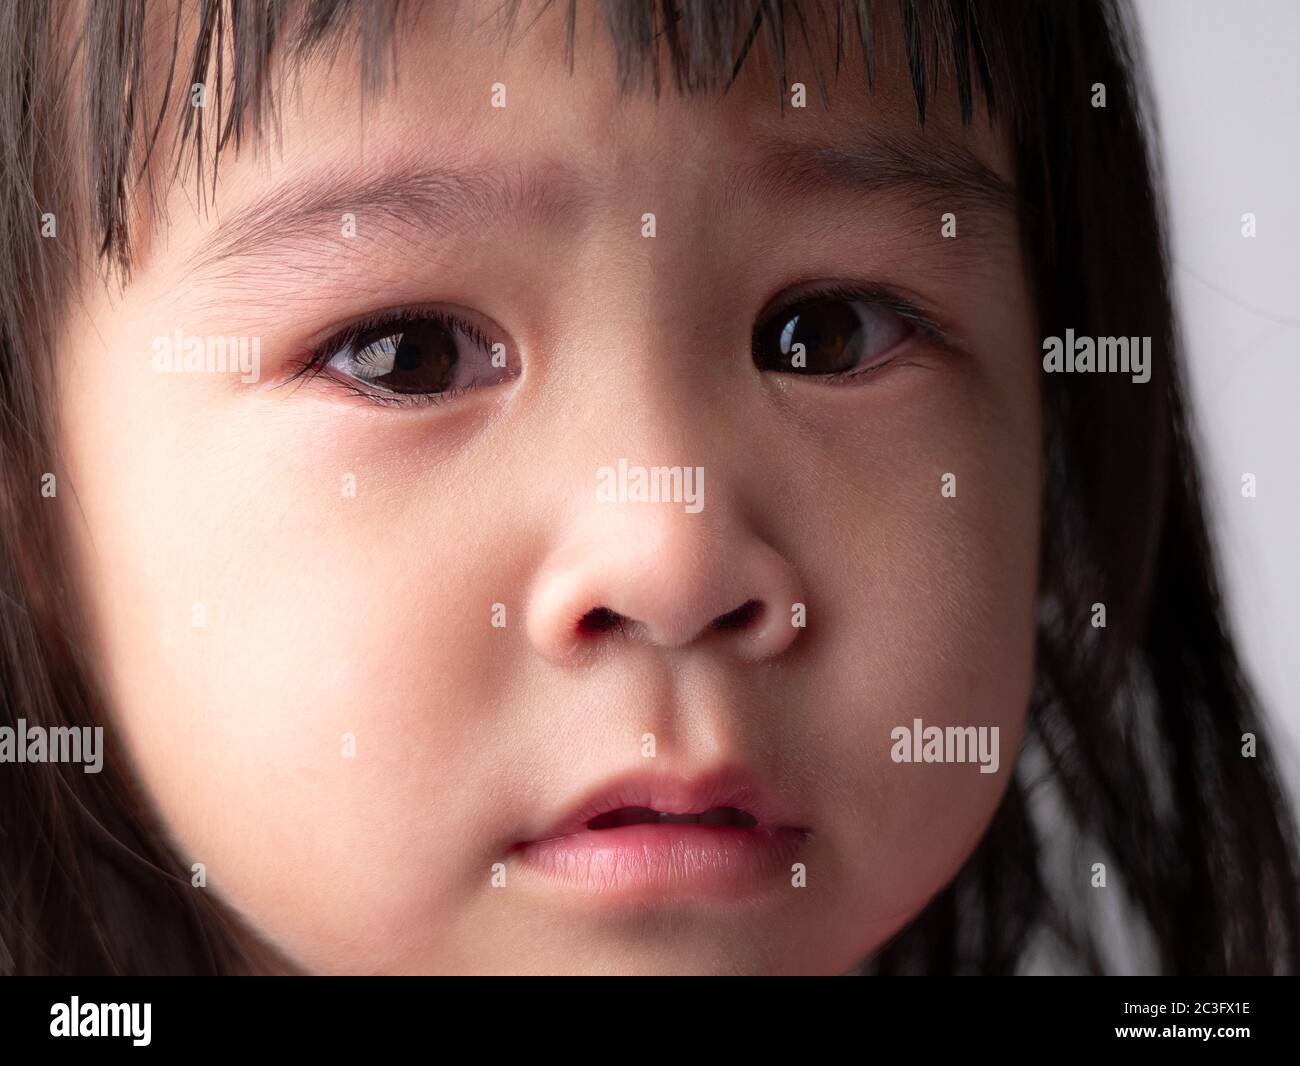 Portrait face of Asian little child girl with sad expression on dark background. Stock Photo